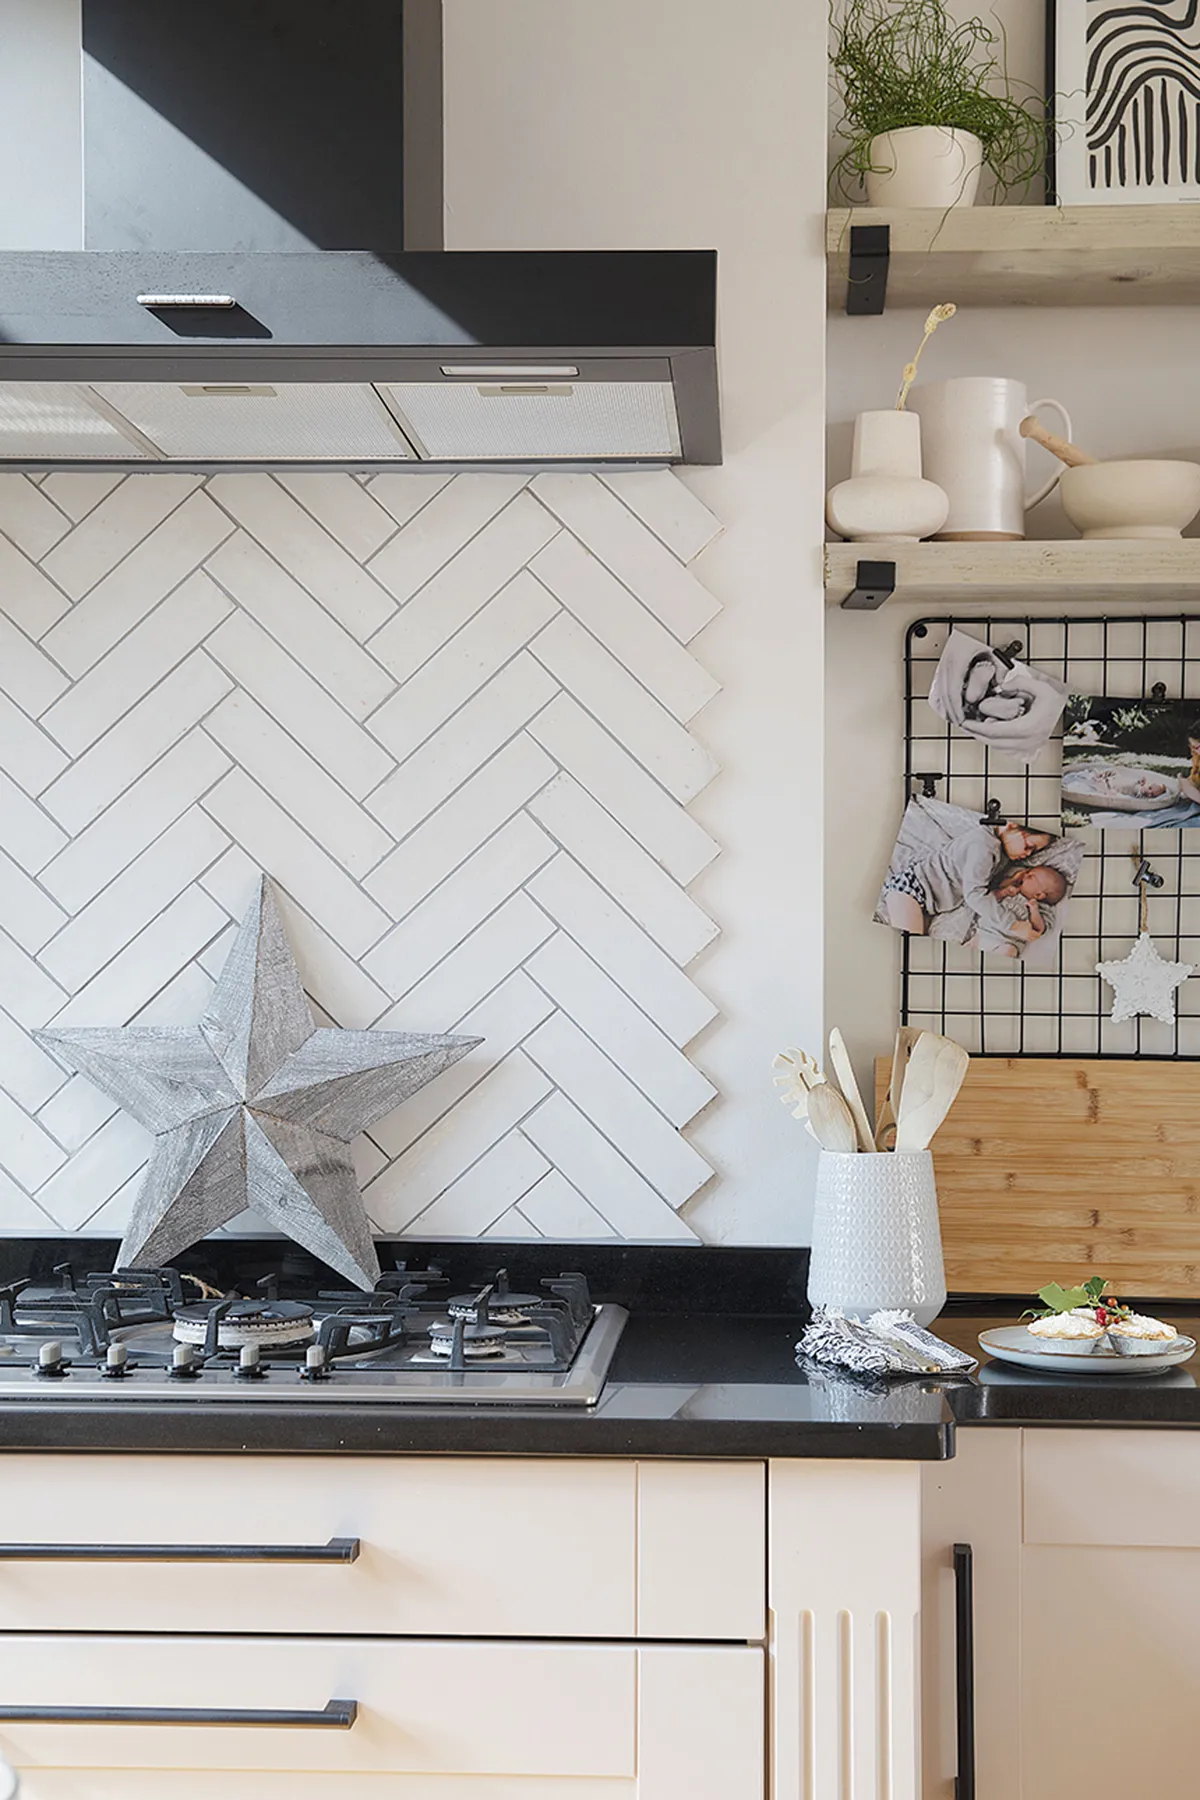 ‘I used a design app to see how the tiles behind the hob would look,’ Louise says. ‘It didn’t look right with a trim around, so I left the jagged edges because I like the uneven, hand-finished effect they create’